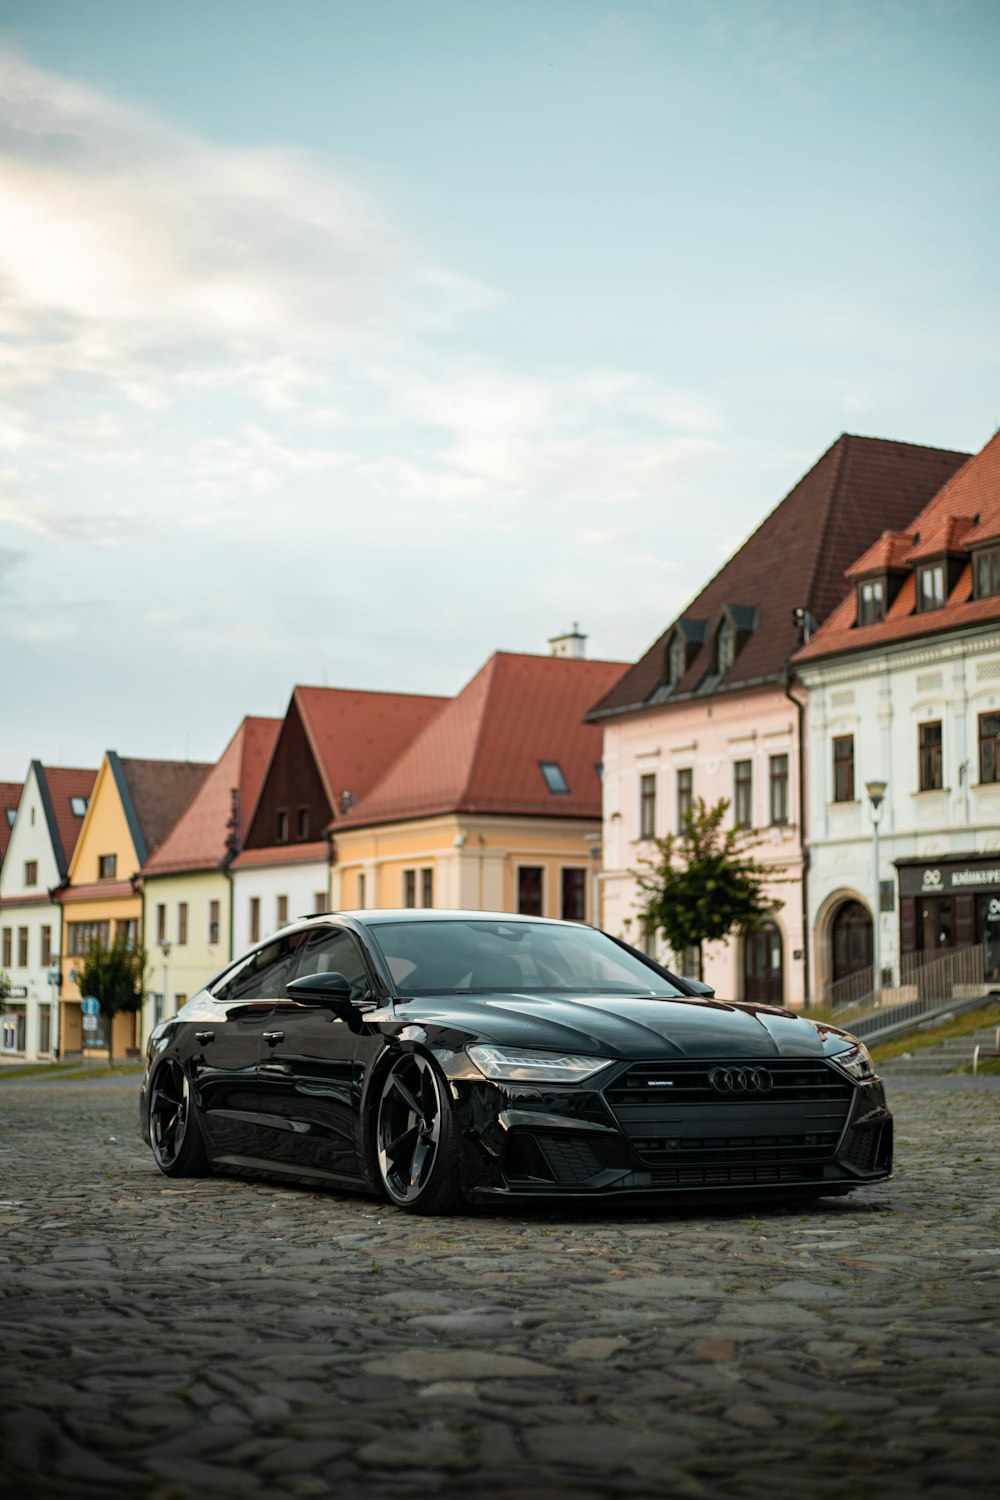 a black sports car parked in front of a row of houses